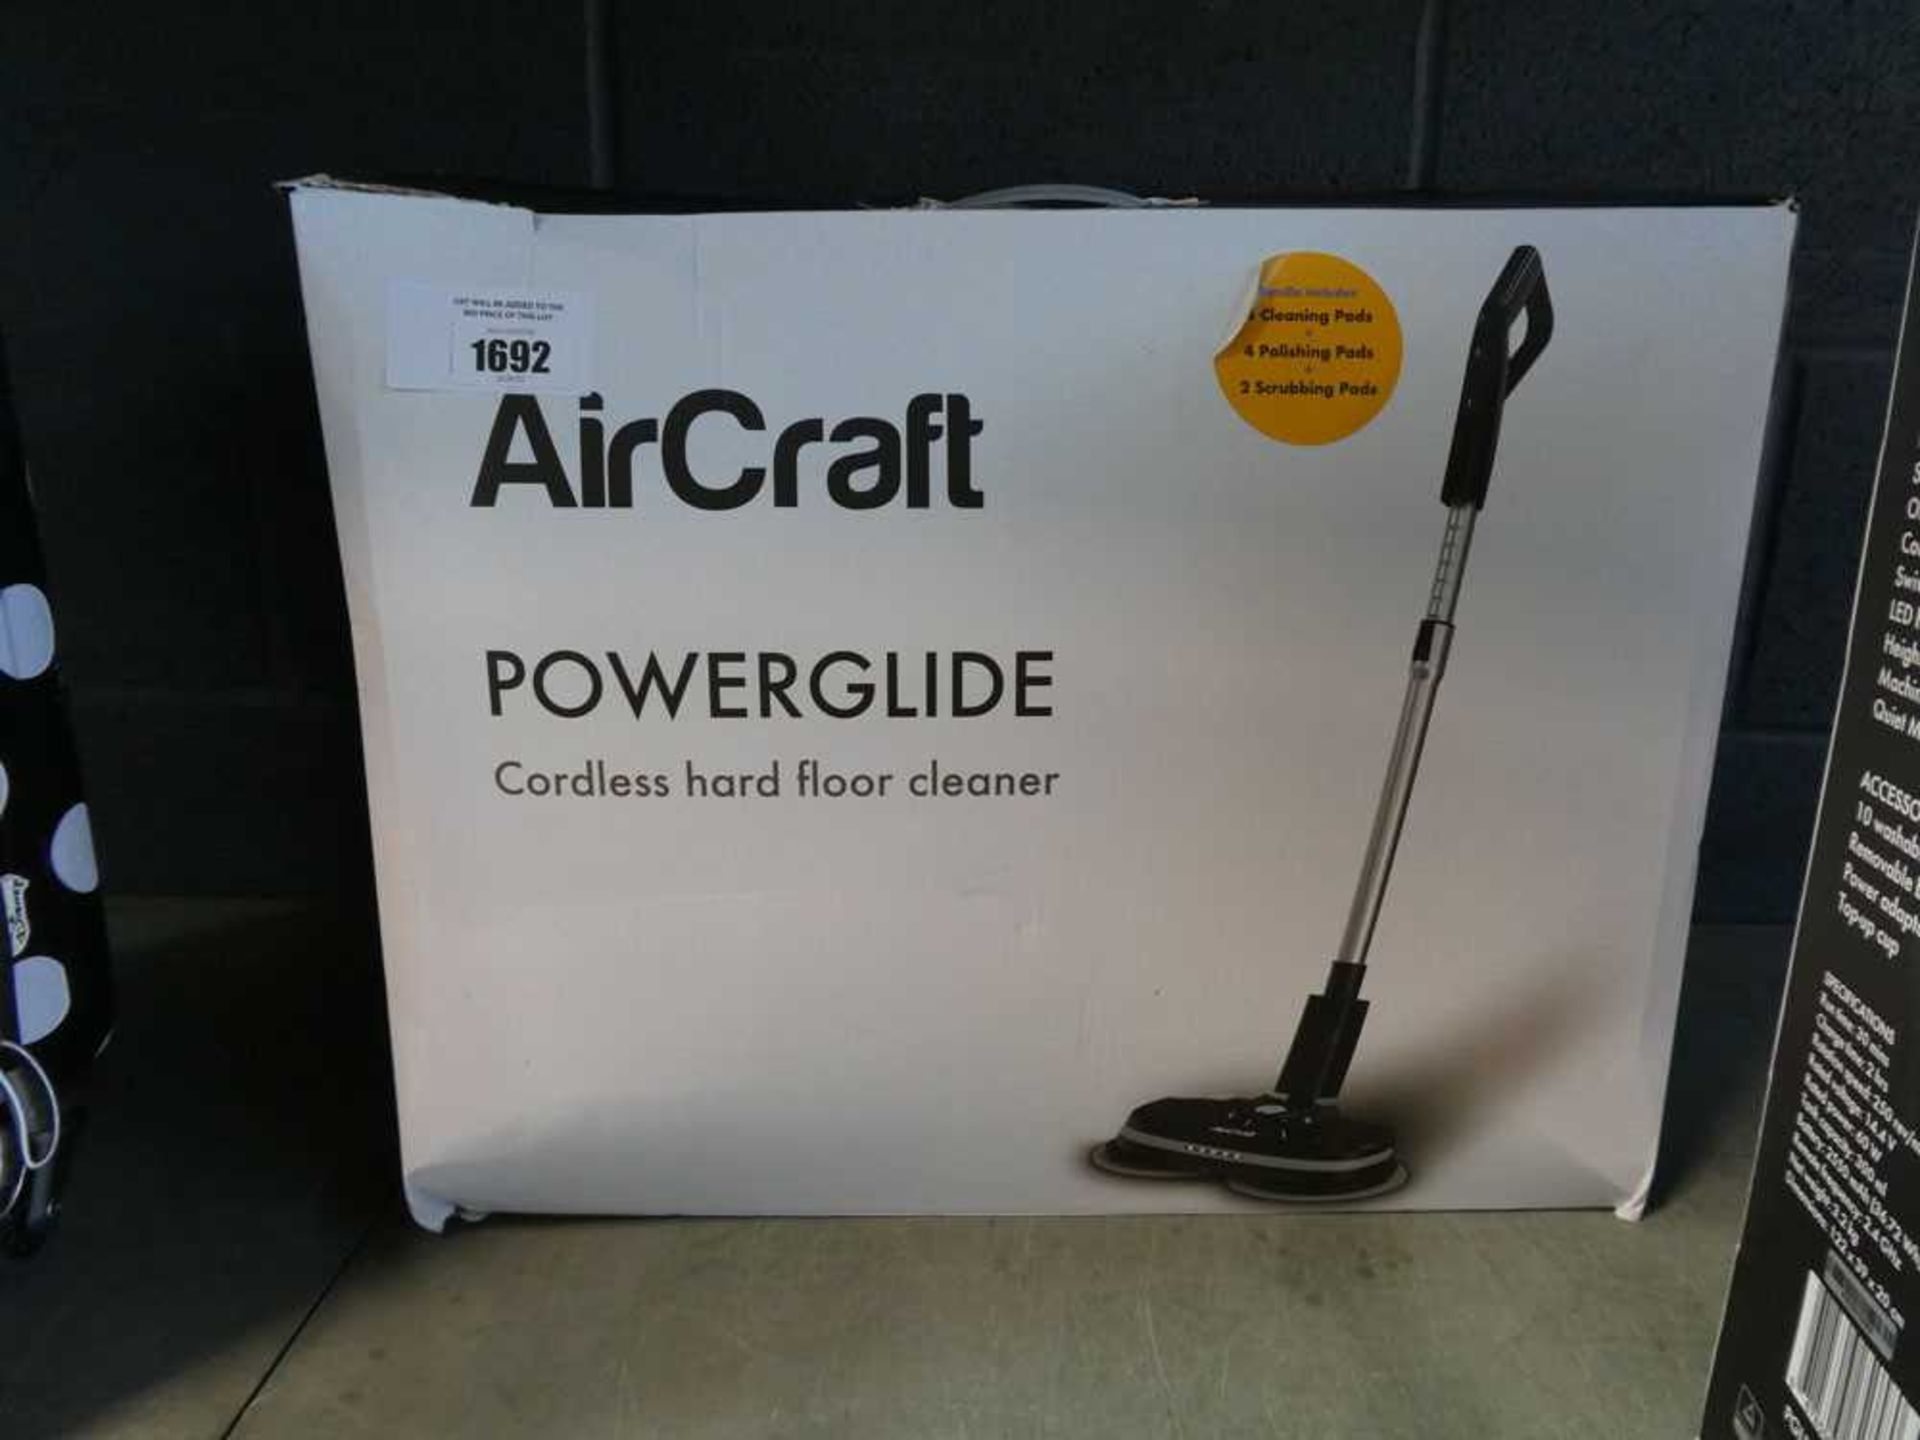 +VAT Aircraft power glide cordless hard floor cleaner in box